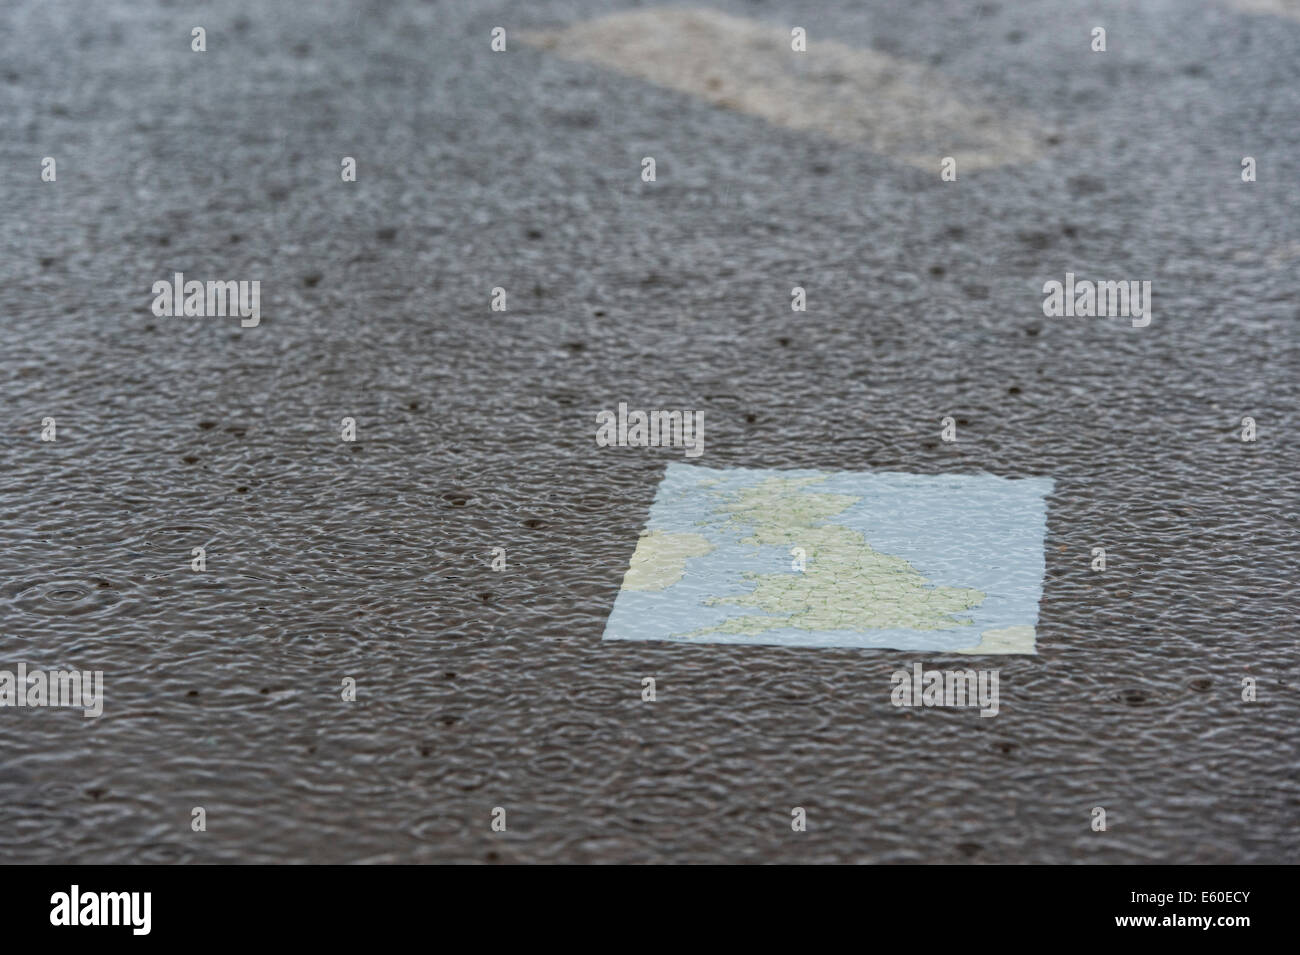 Map of The United Kingdom in a puddle on a road in the rain. Stock Photo